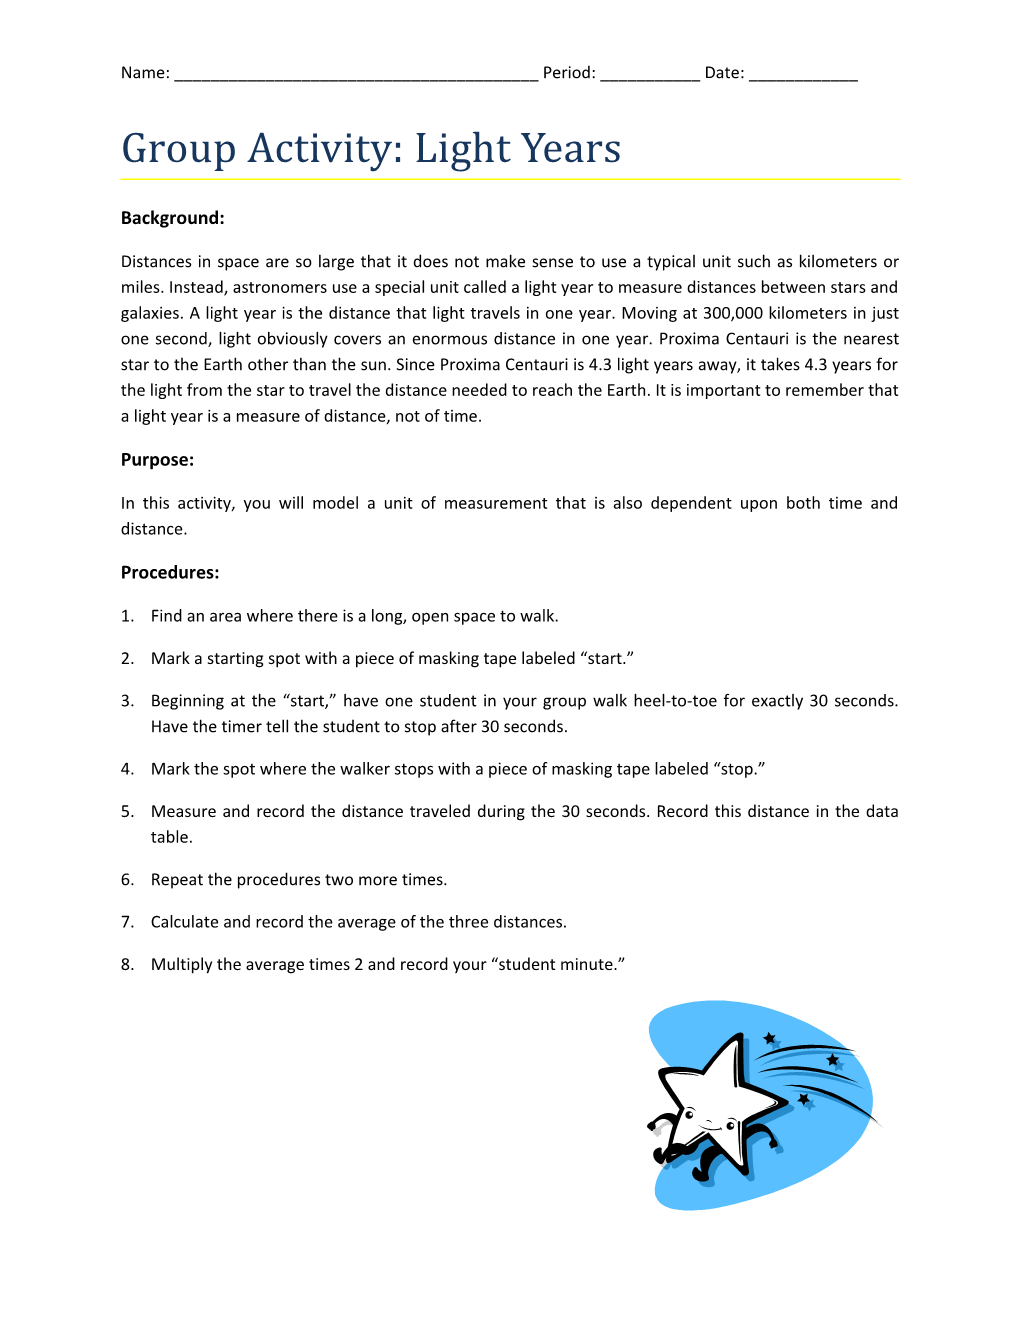 Group Activity: Light Years